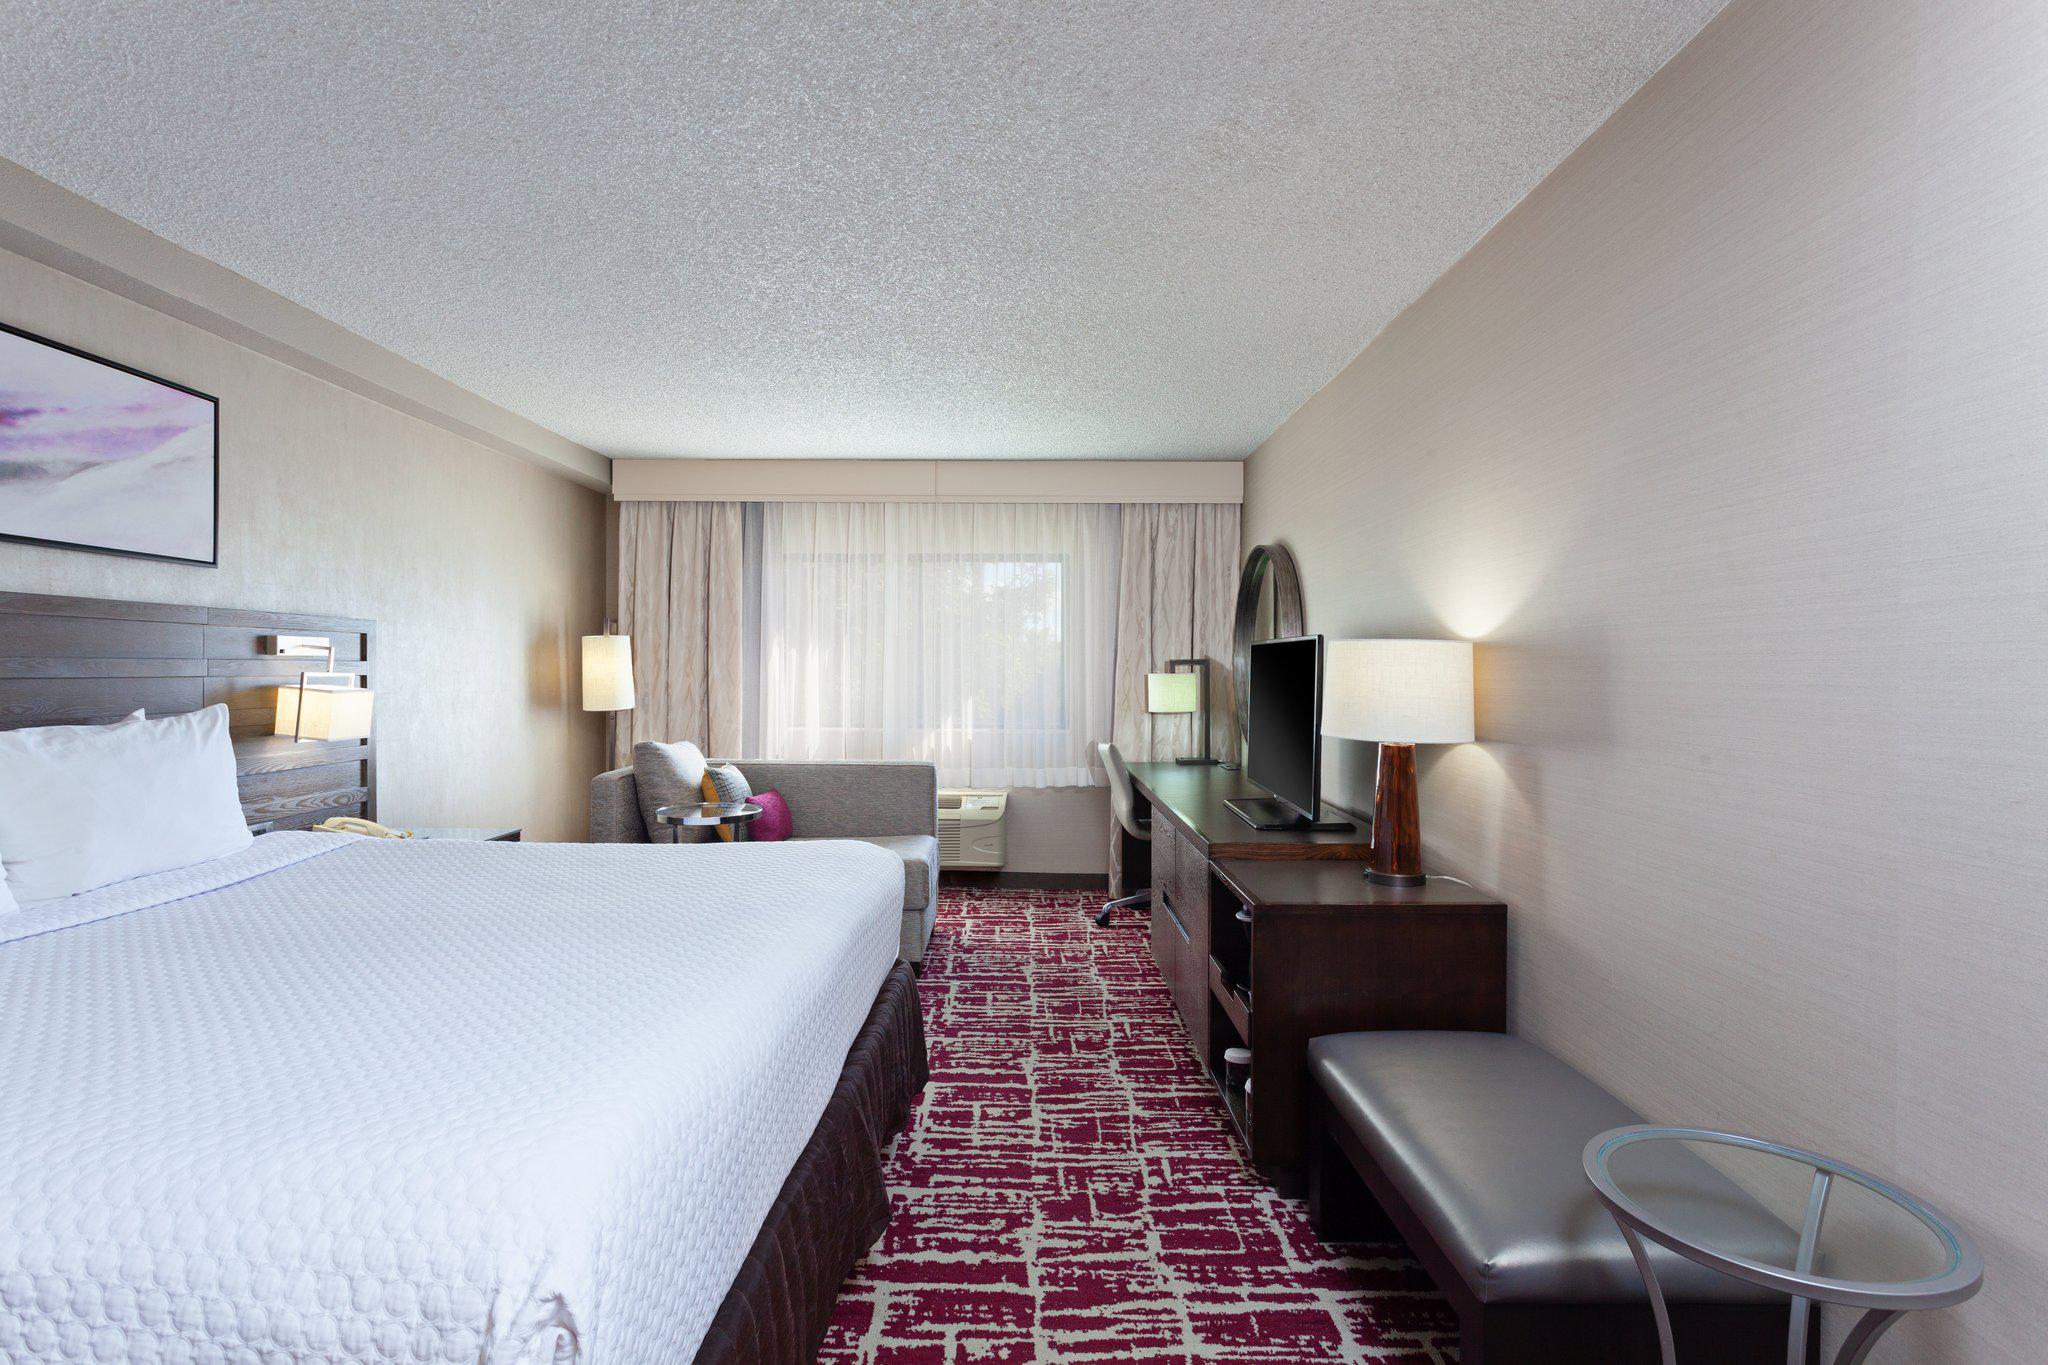 Crowne Plaza Silicon Valley N - Union City Photo